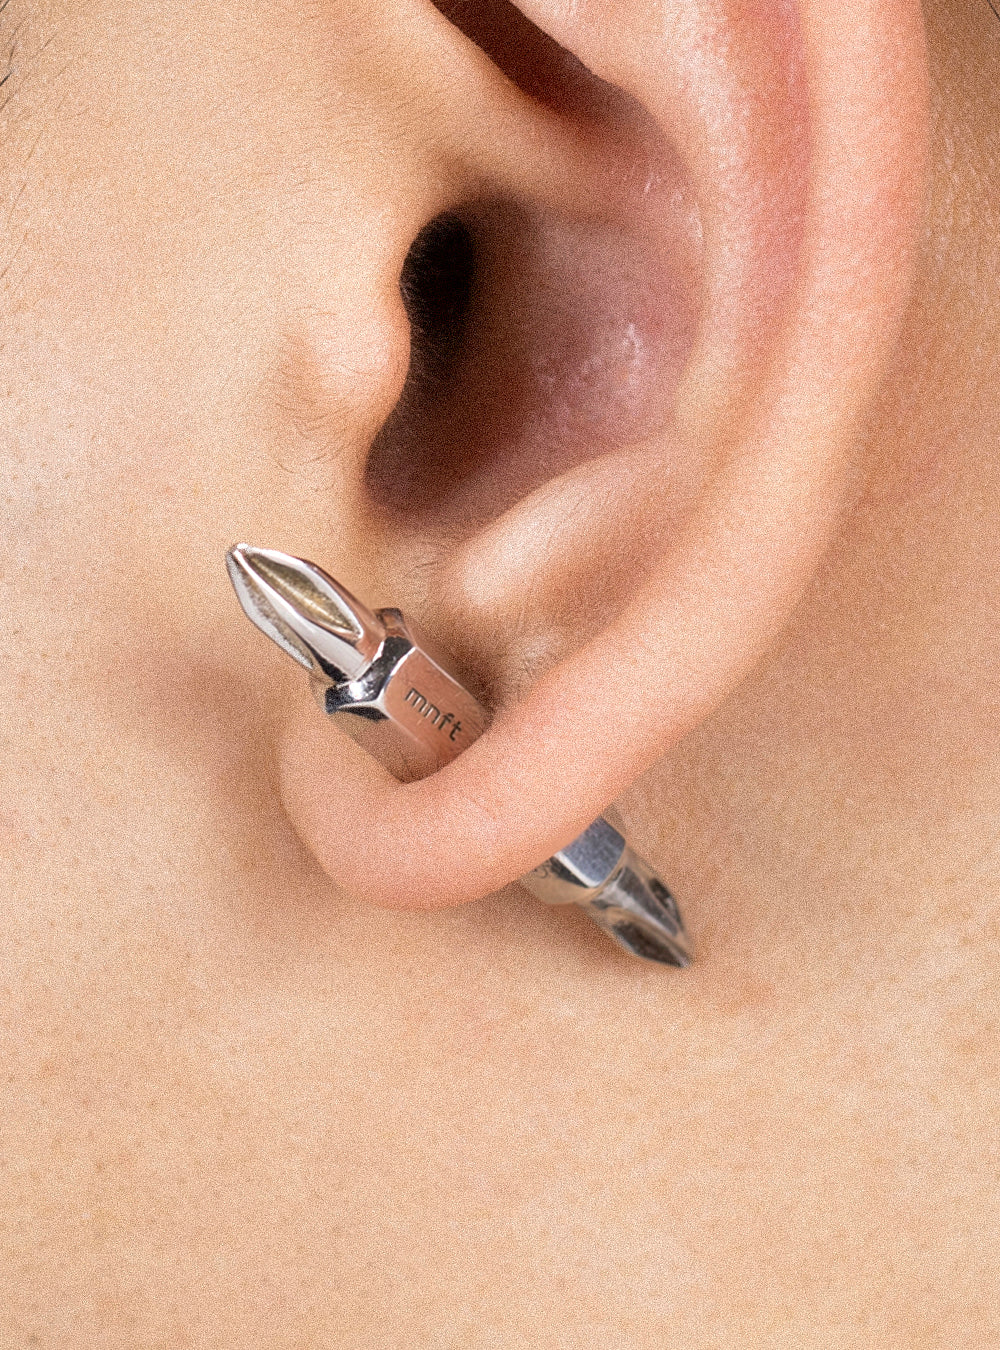 A woman's ear with a MIDNIGHTFACTORY Dual-driverbits earring.